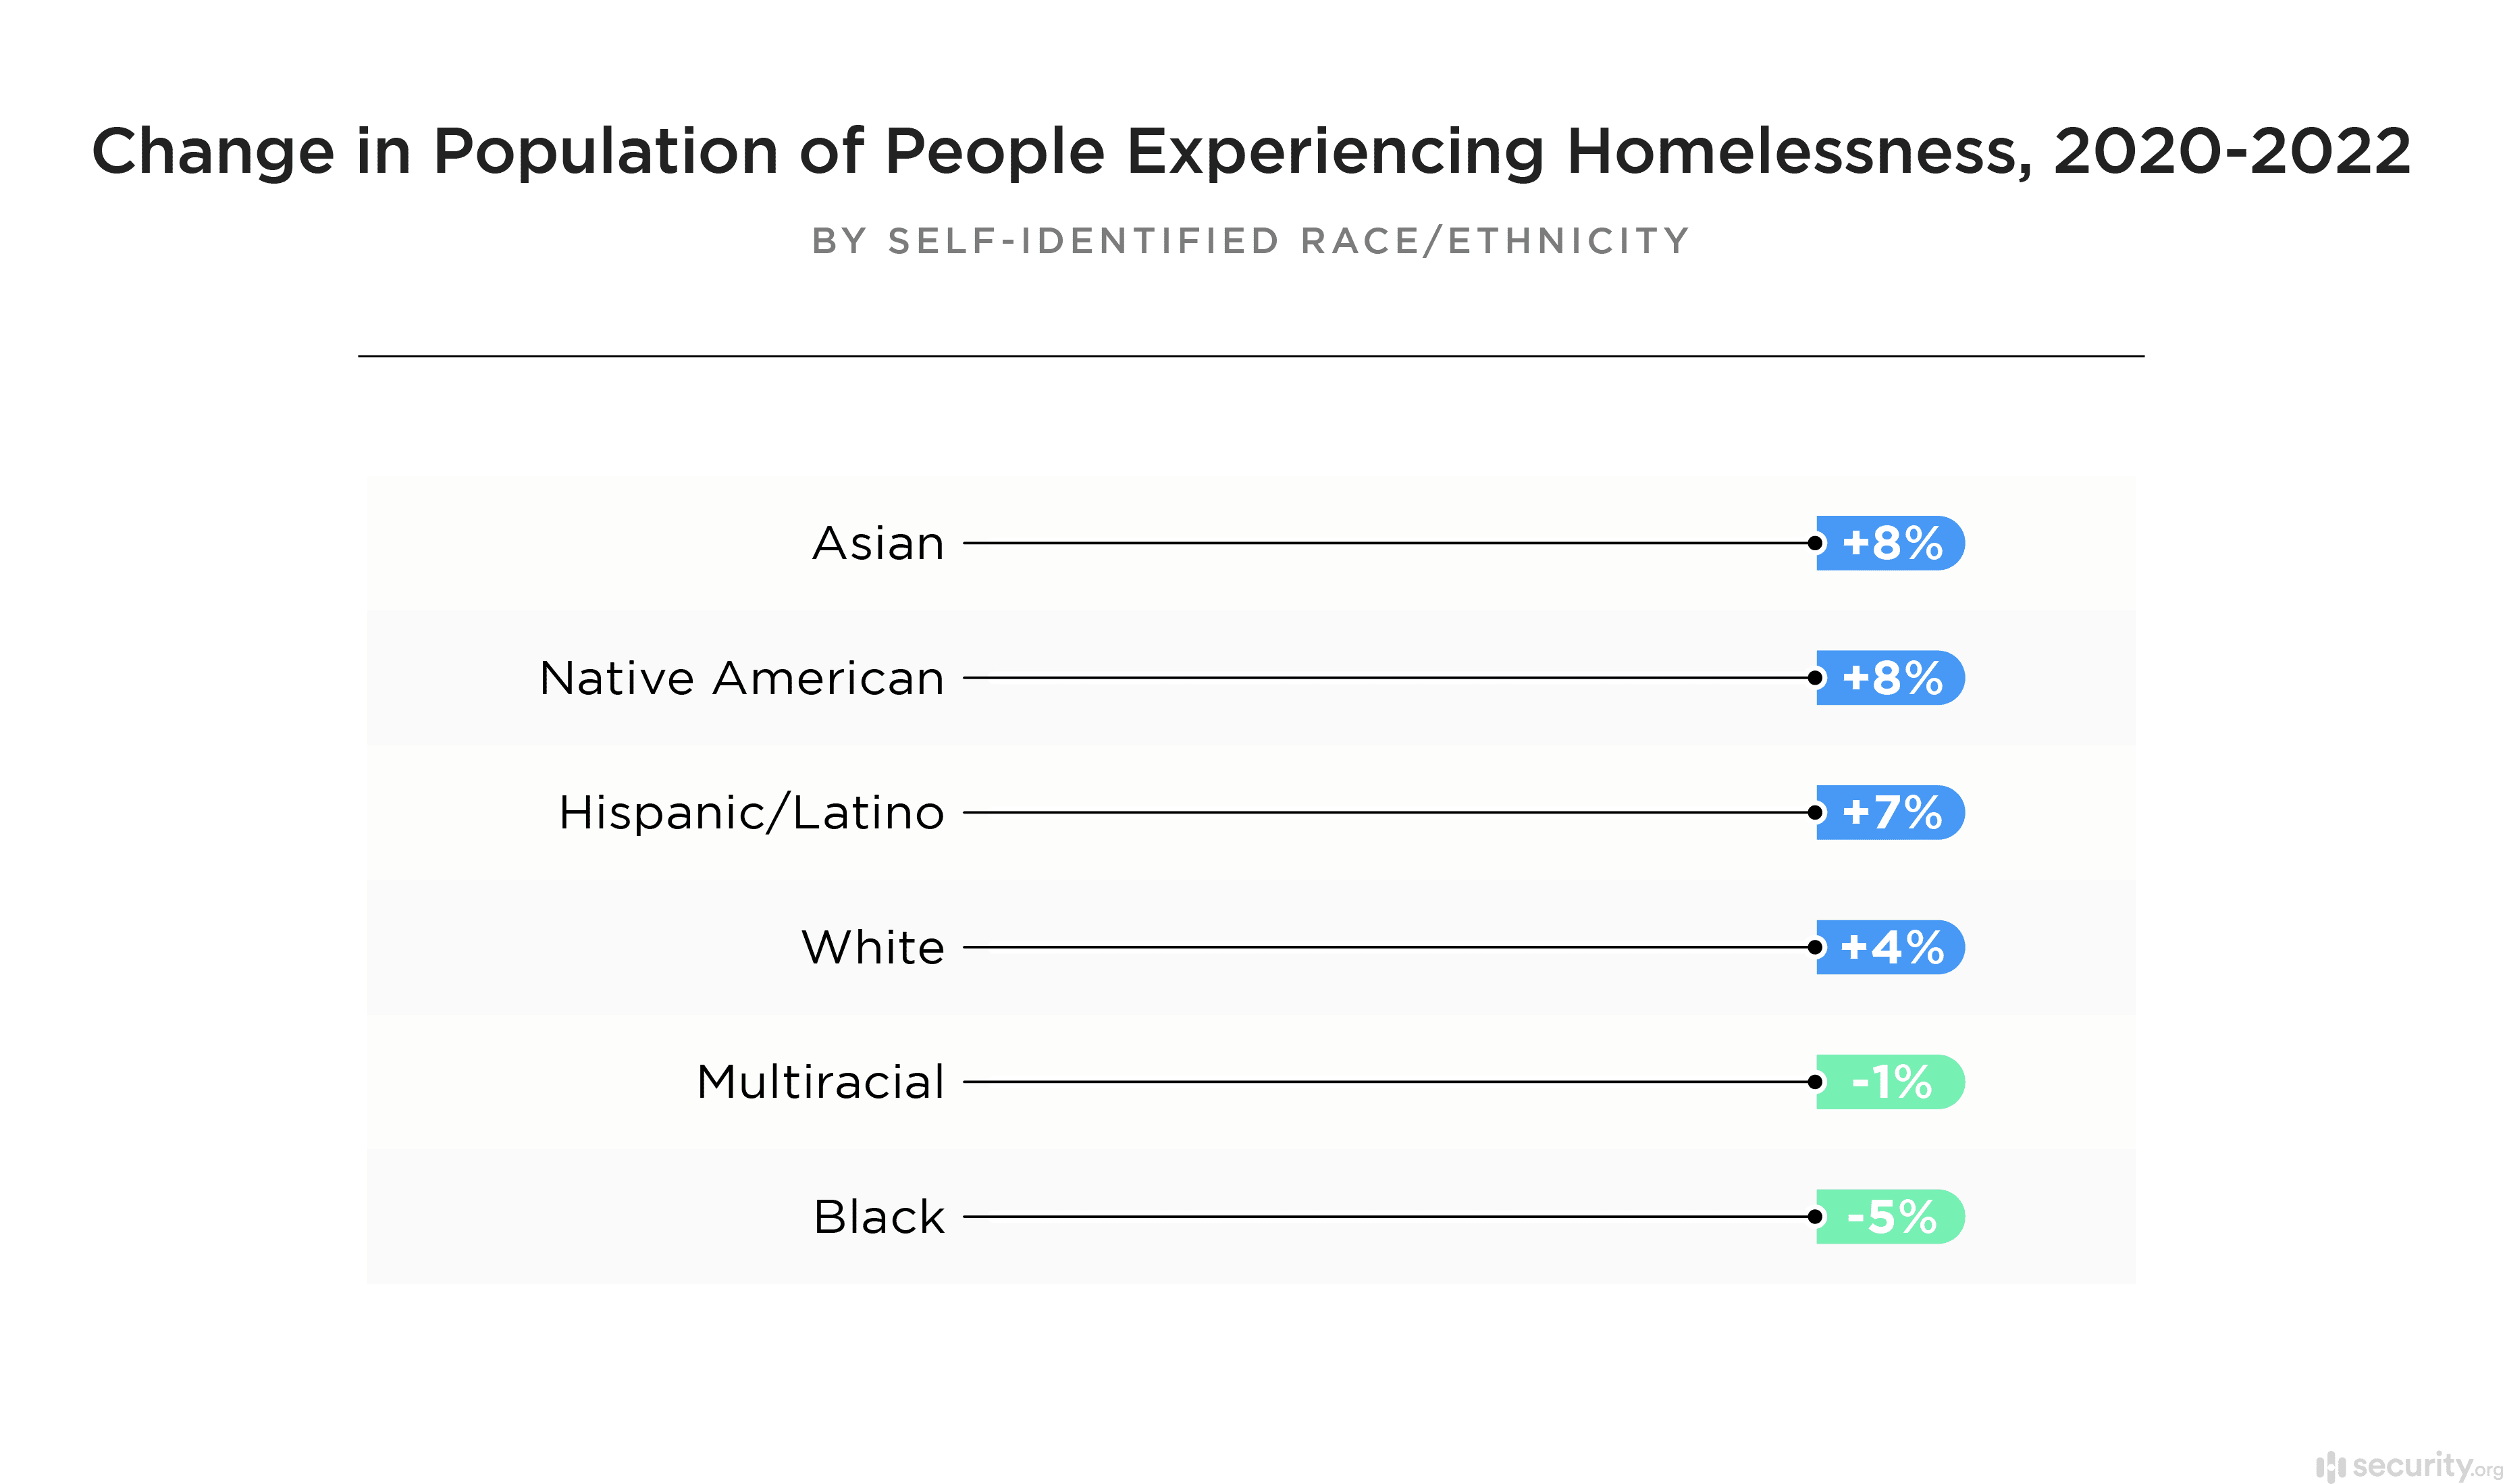 Change in Population of People Experiencing Homelessness 2020 to 2022